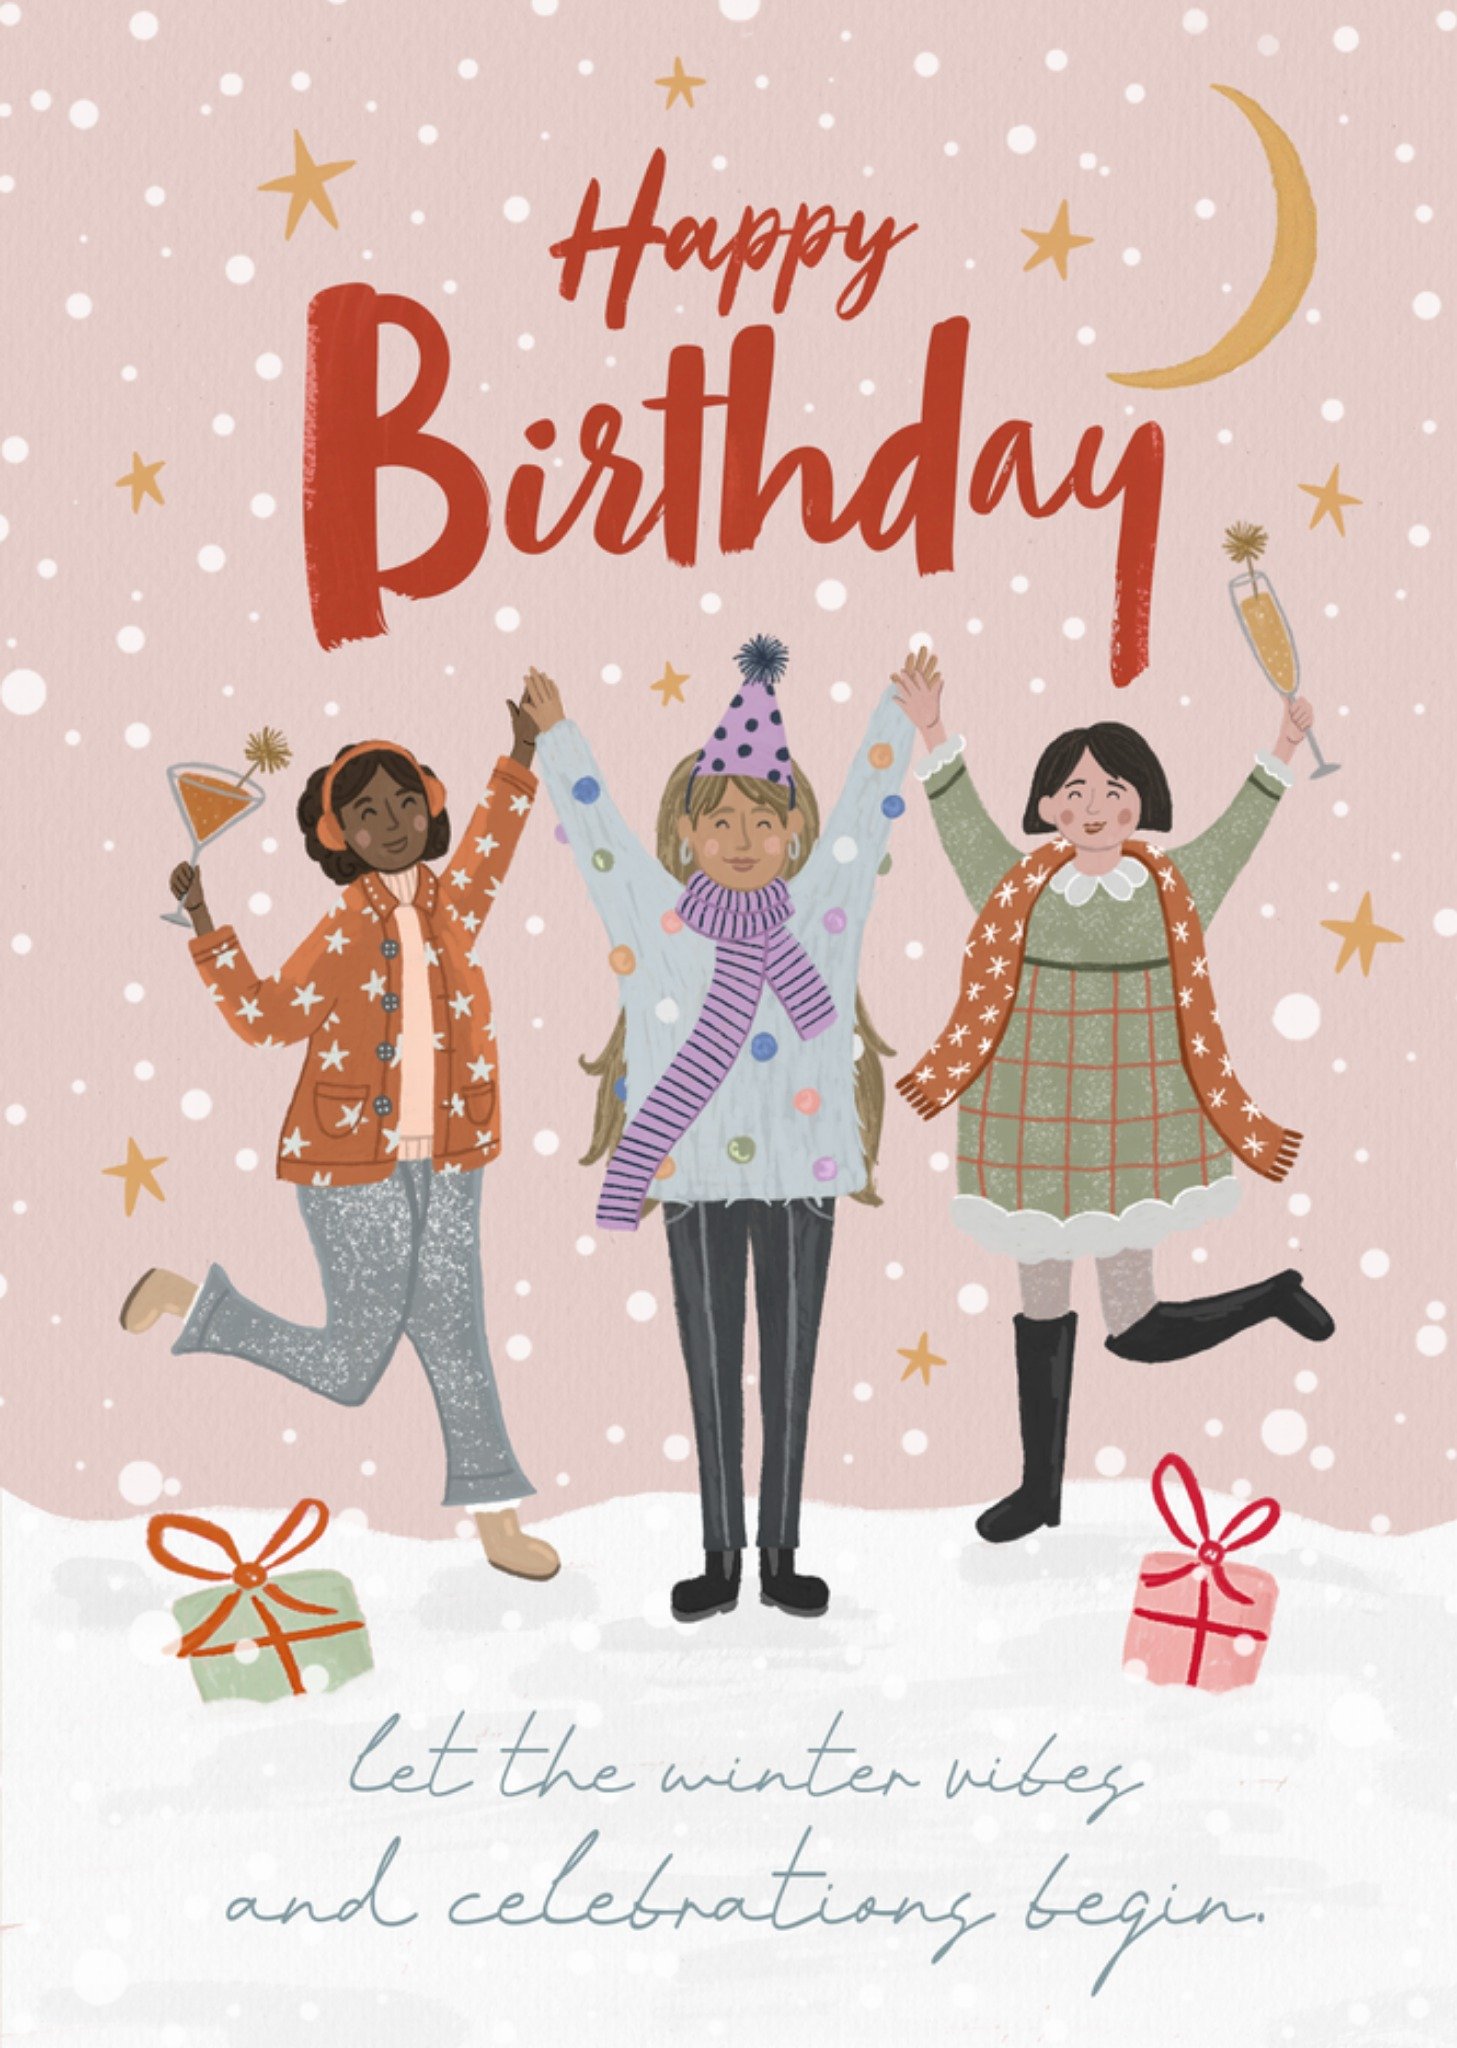 Moonpig Happy Winter Vibes Illustrated Celebrating Cheerful Friends In The Snow Birthday Card Ecard